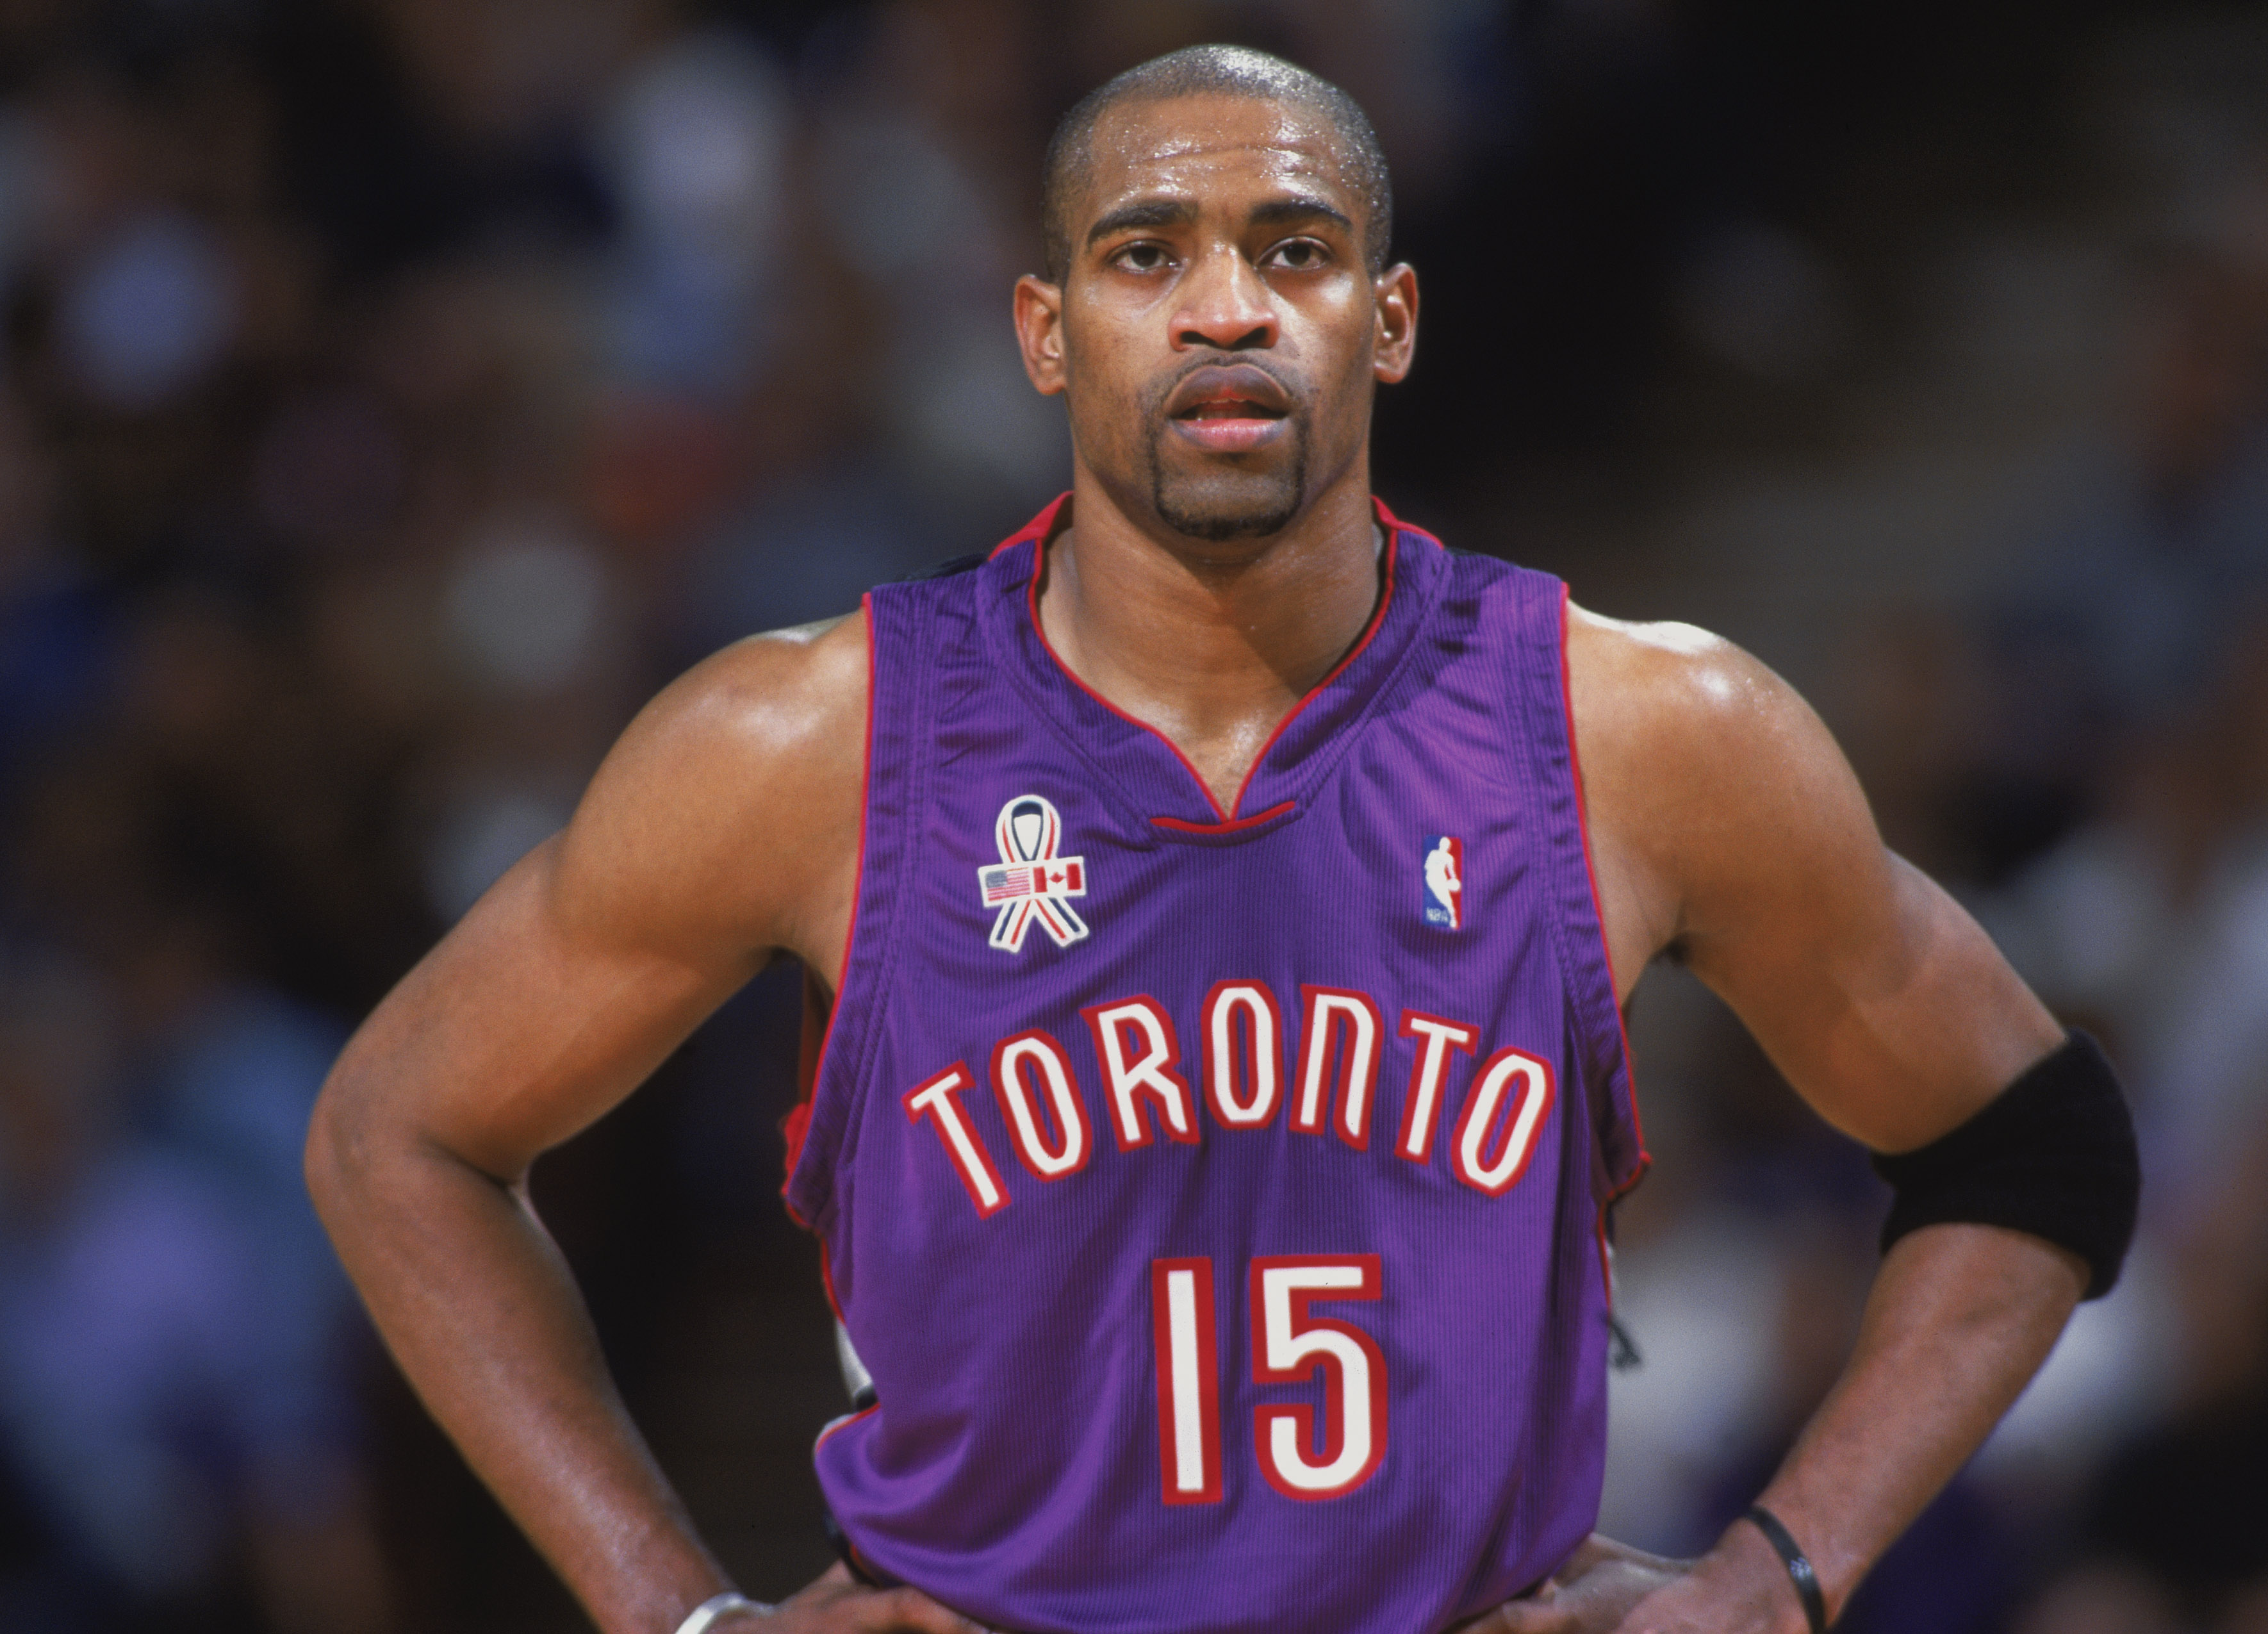 Vince Carter looks on